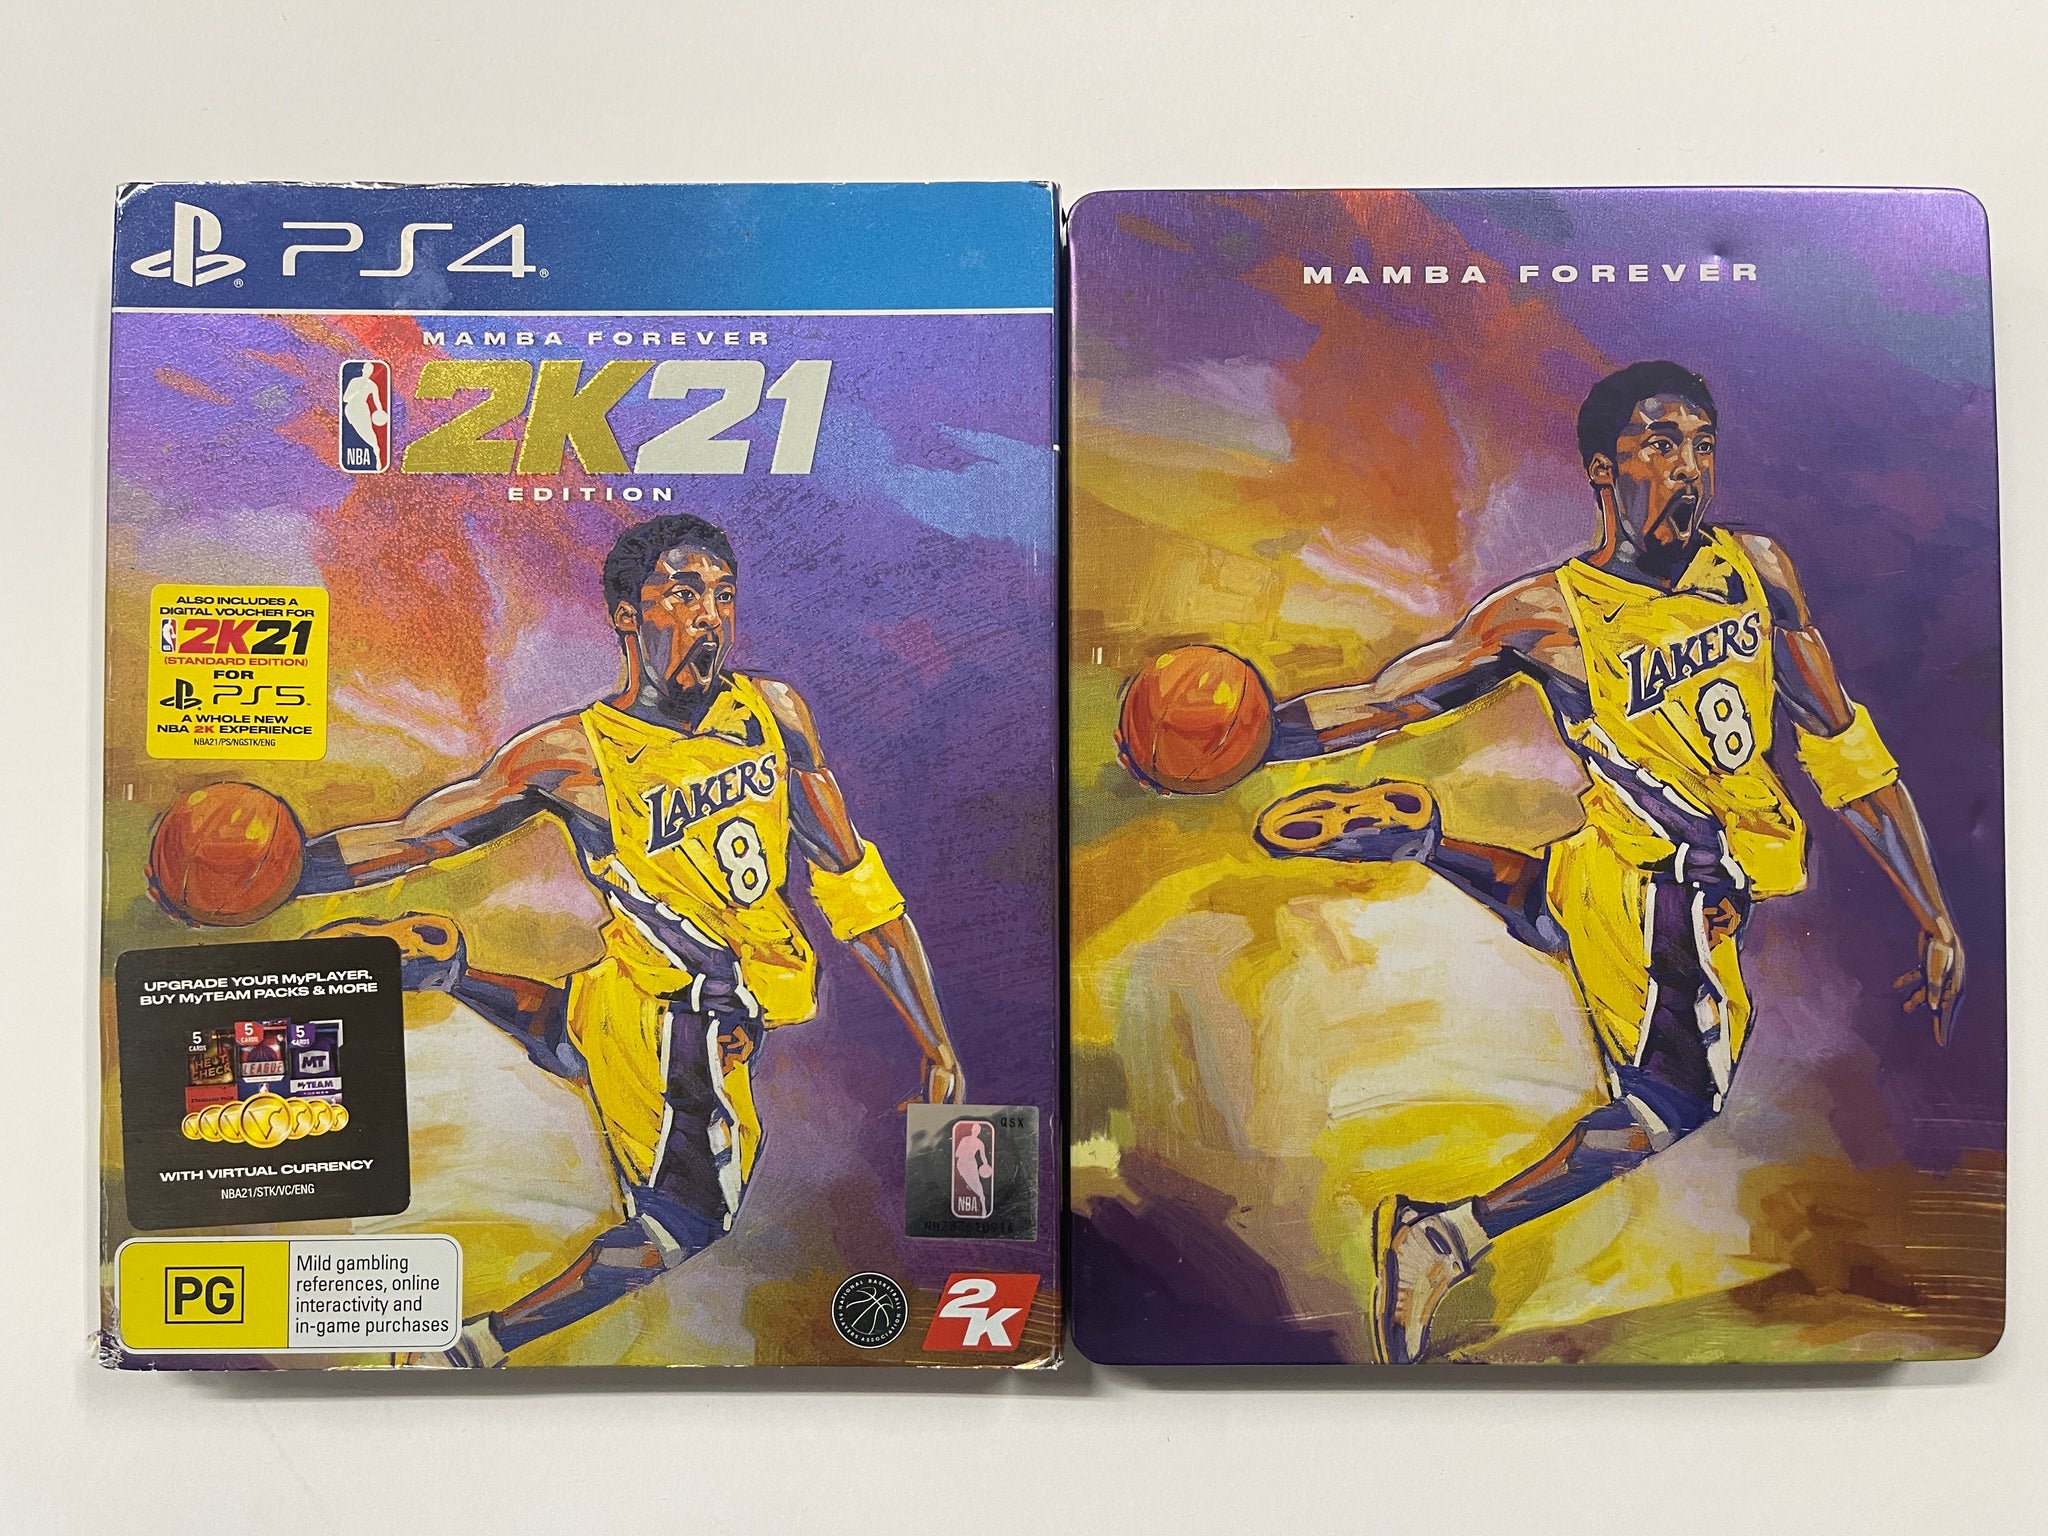 NBA 2K21 Mamba Forever Edition Complete In Original Steelbook Case with Outer Cover